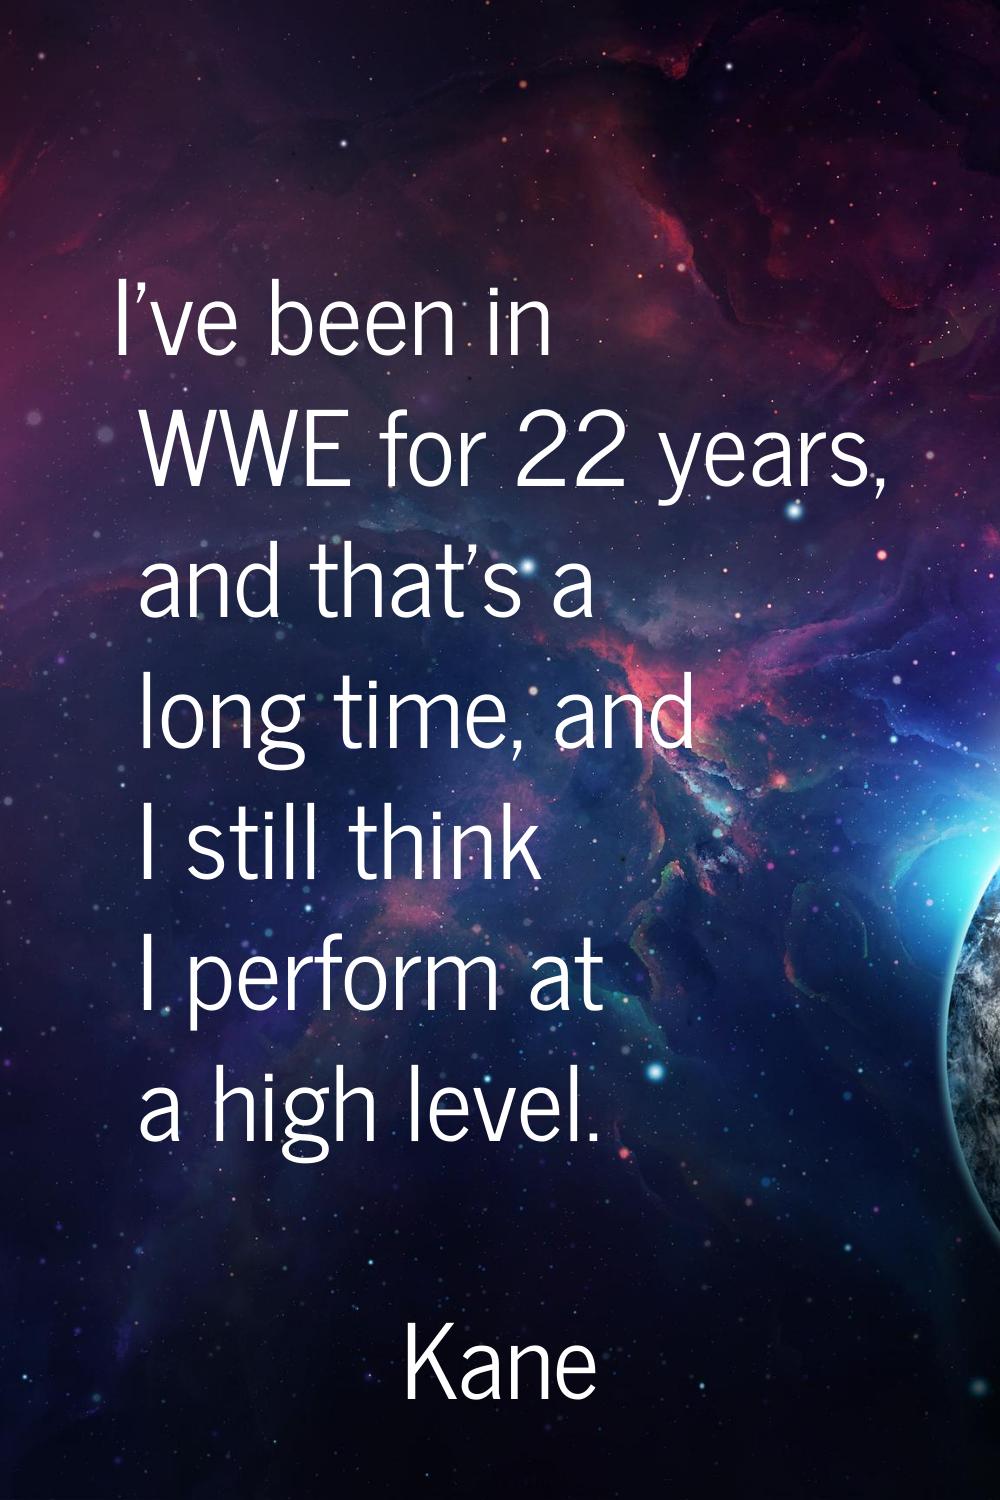 I've been in WWE for 22 years, and that's a long time, and I still think I perform at a high level.